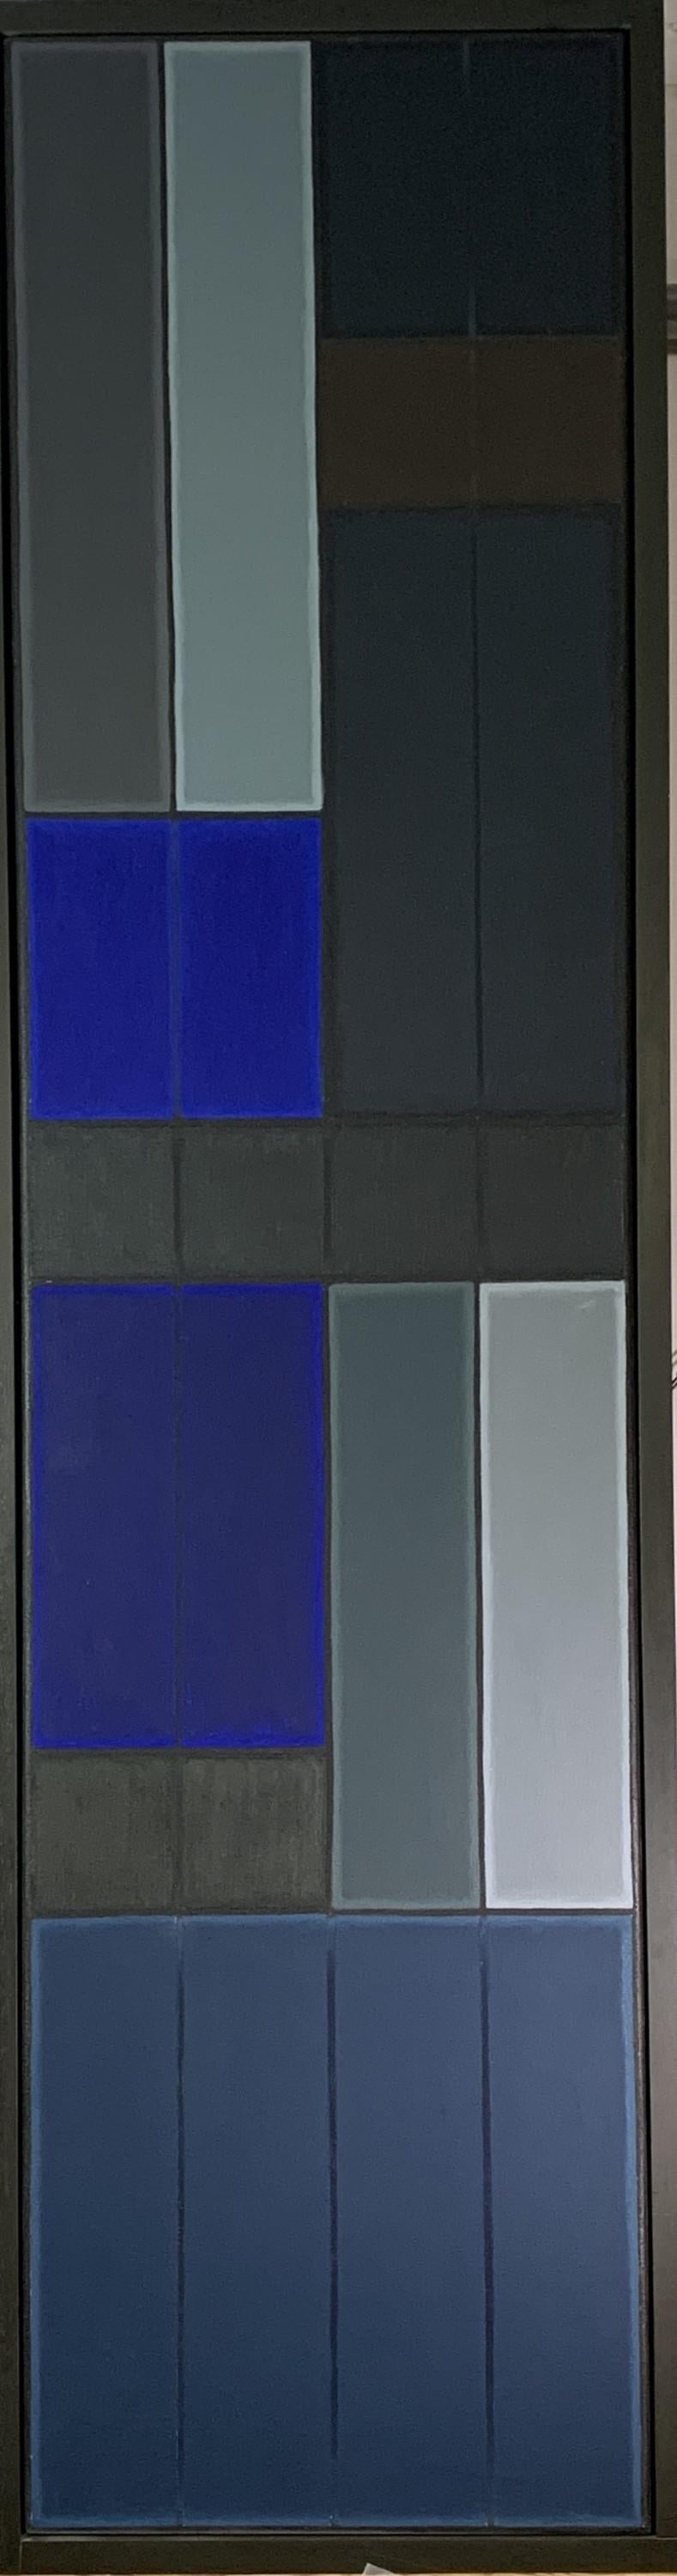 John Hopwood Abstract Painting - Untitled Blue Abstract Number 1.  Geometric Oil painting